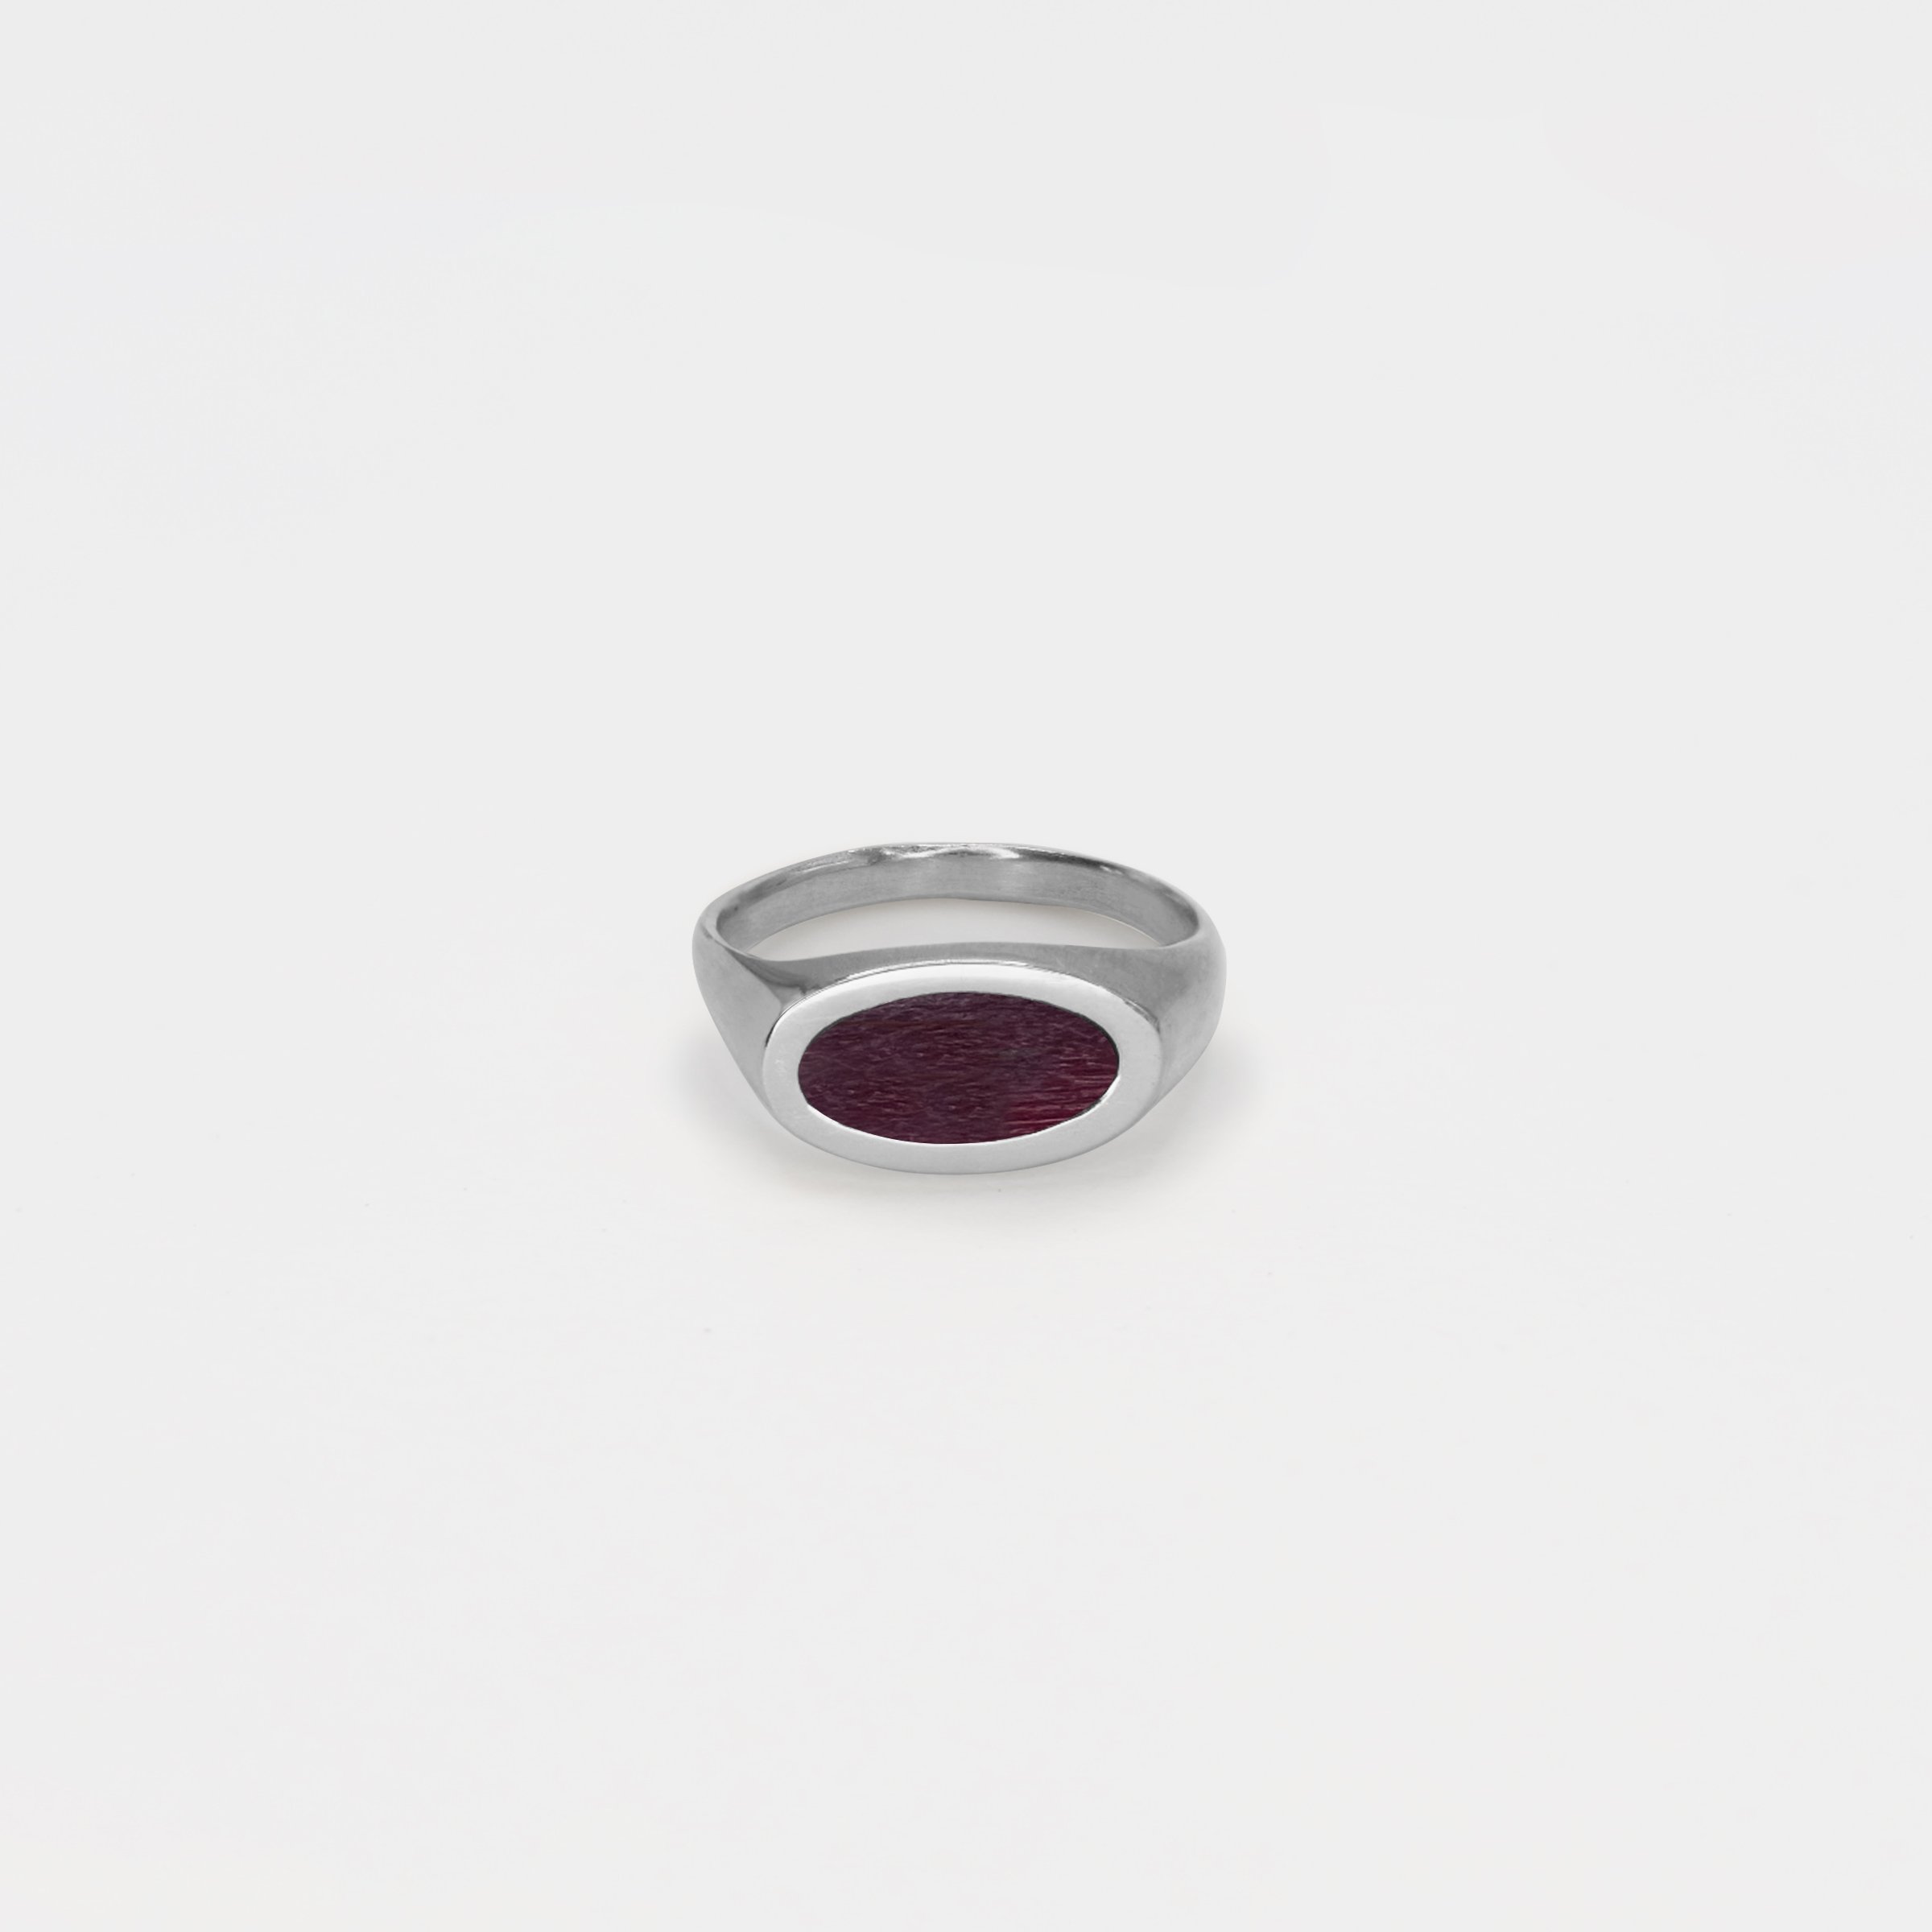 The Small Pedestal Ring Silver Rosewood.jpg